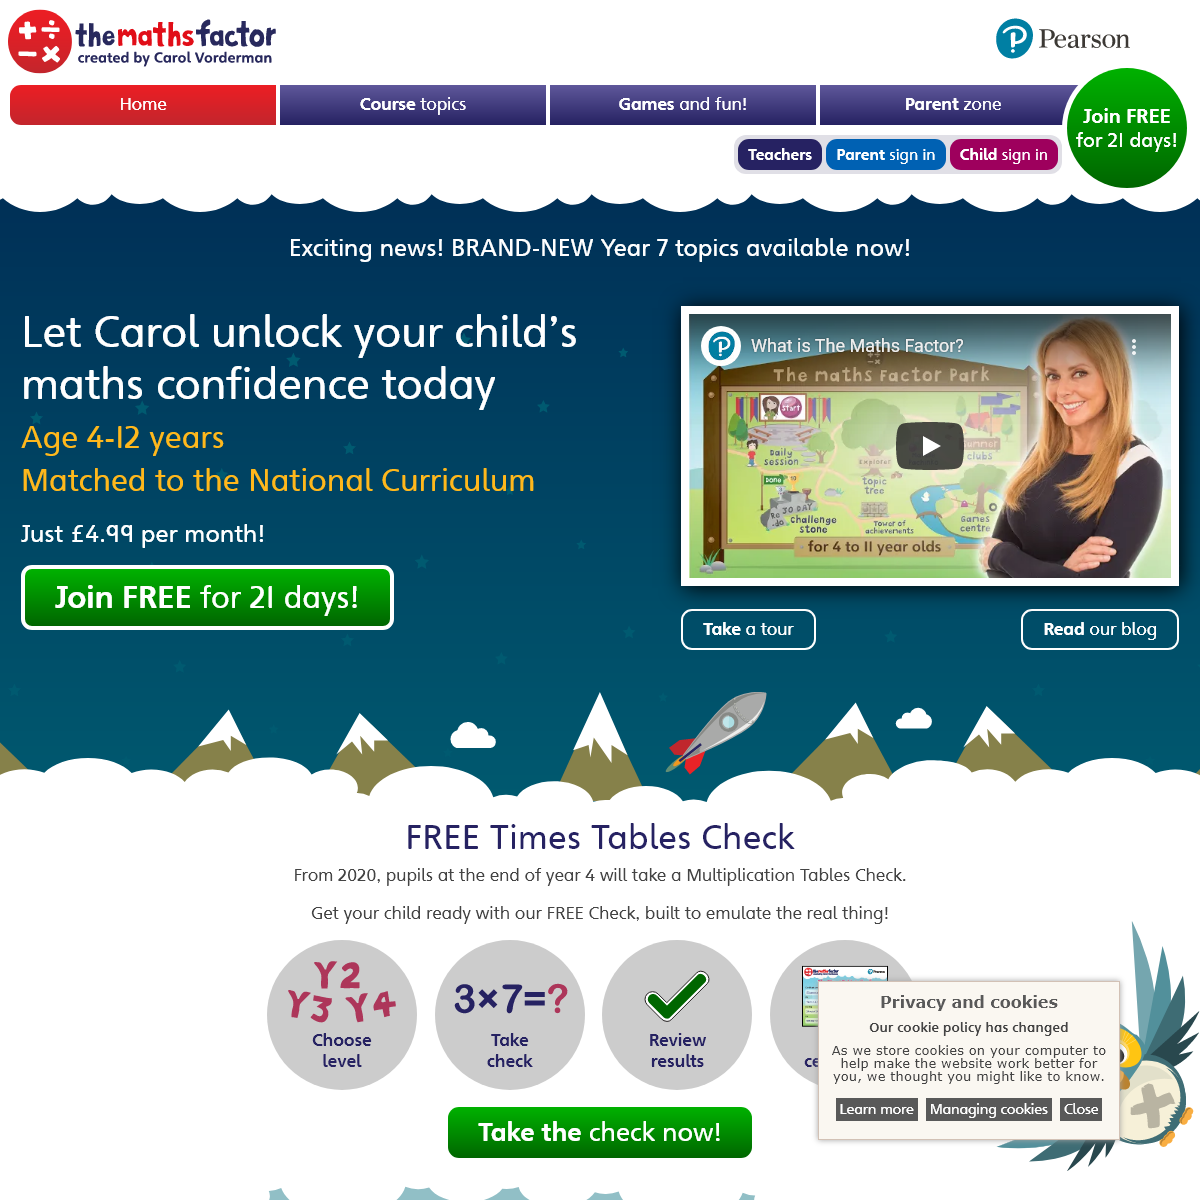 A complete backup of themathsfactor.com